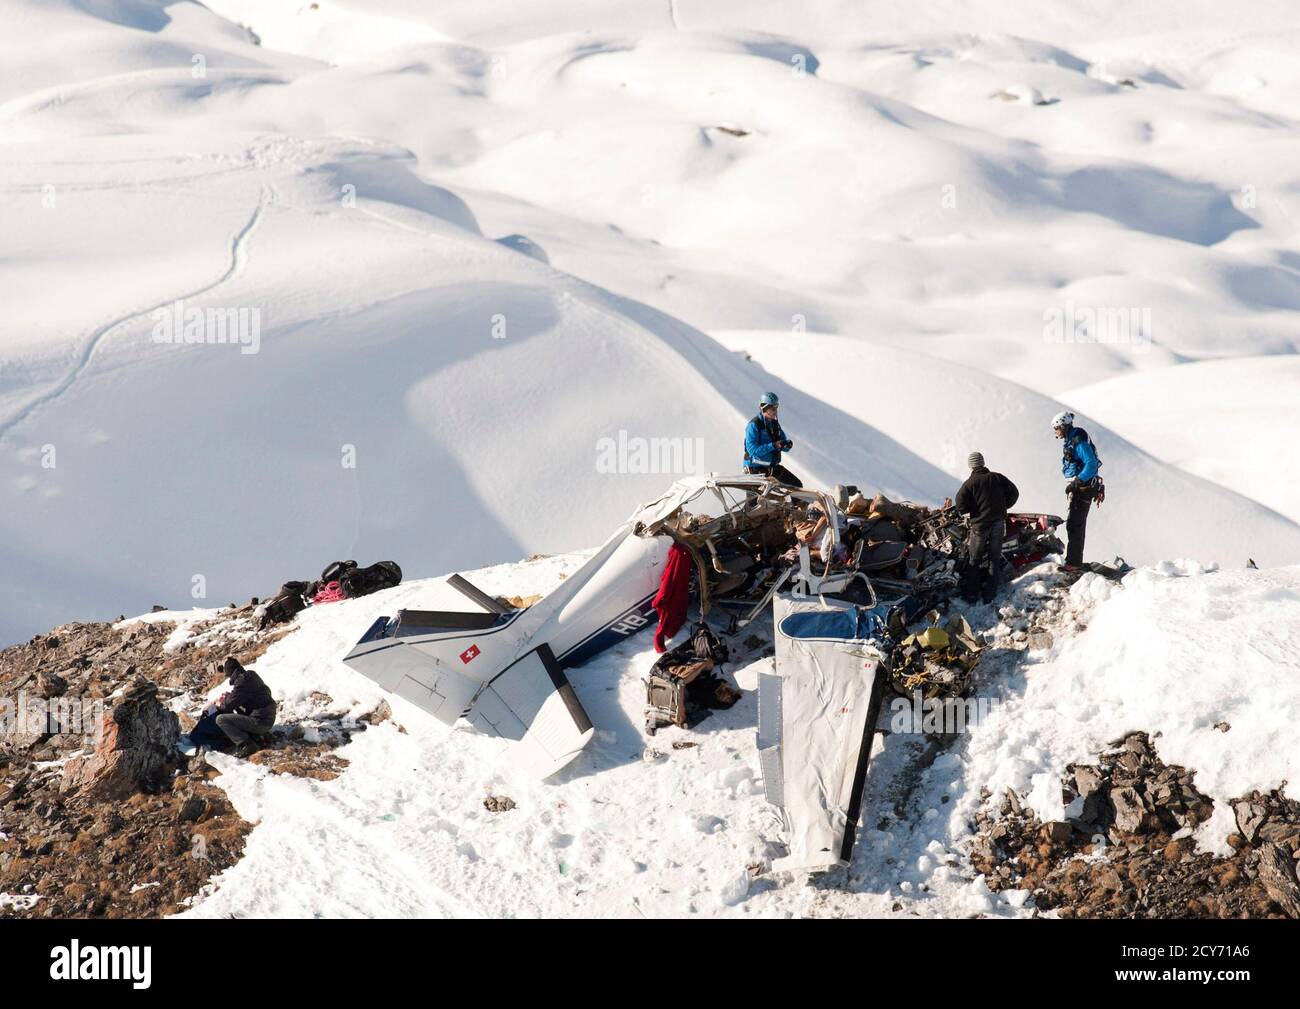 Rescuers work on the wreckage of a Beechcraft plane after a crash near the  Weisshorn in the Val d'Anniviers region February 11, 2011. The aircraft  disappeared from radar screen at 12:45 local